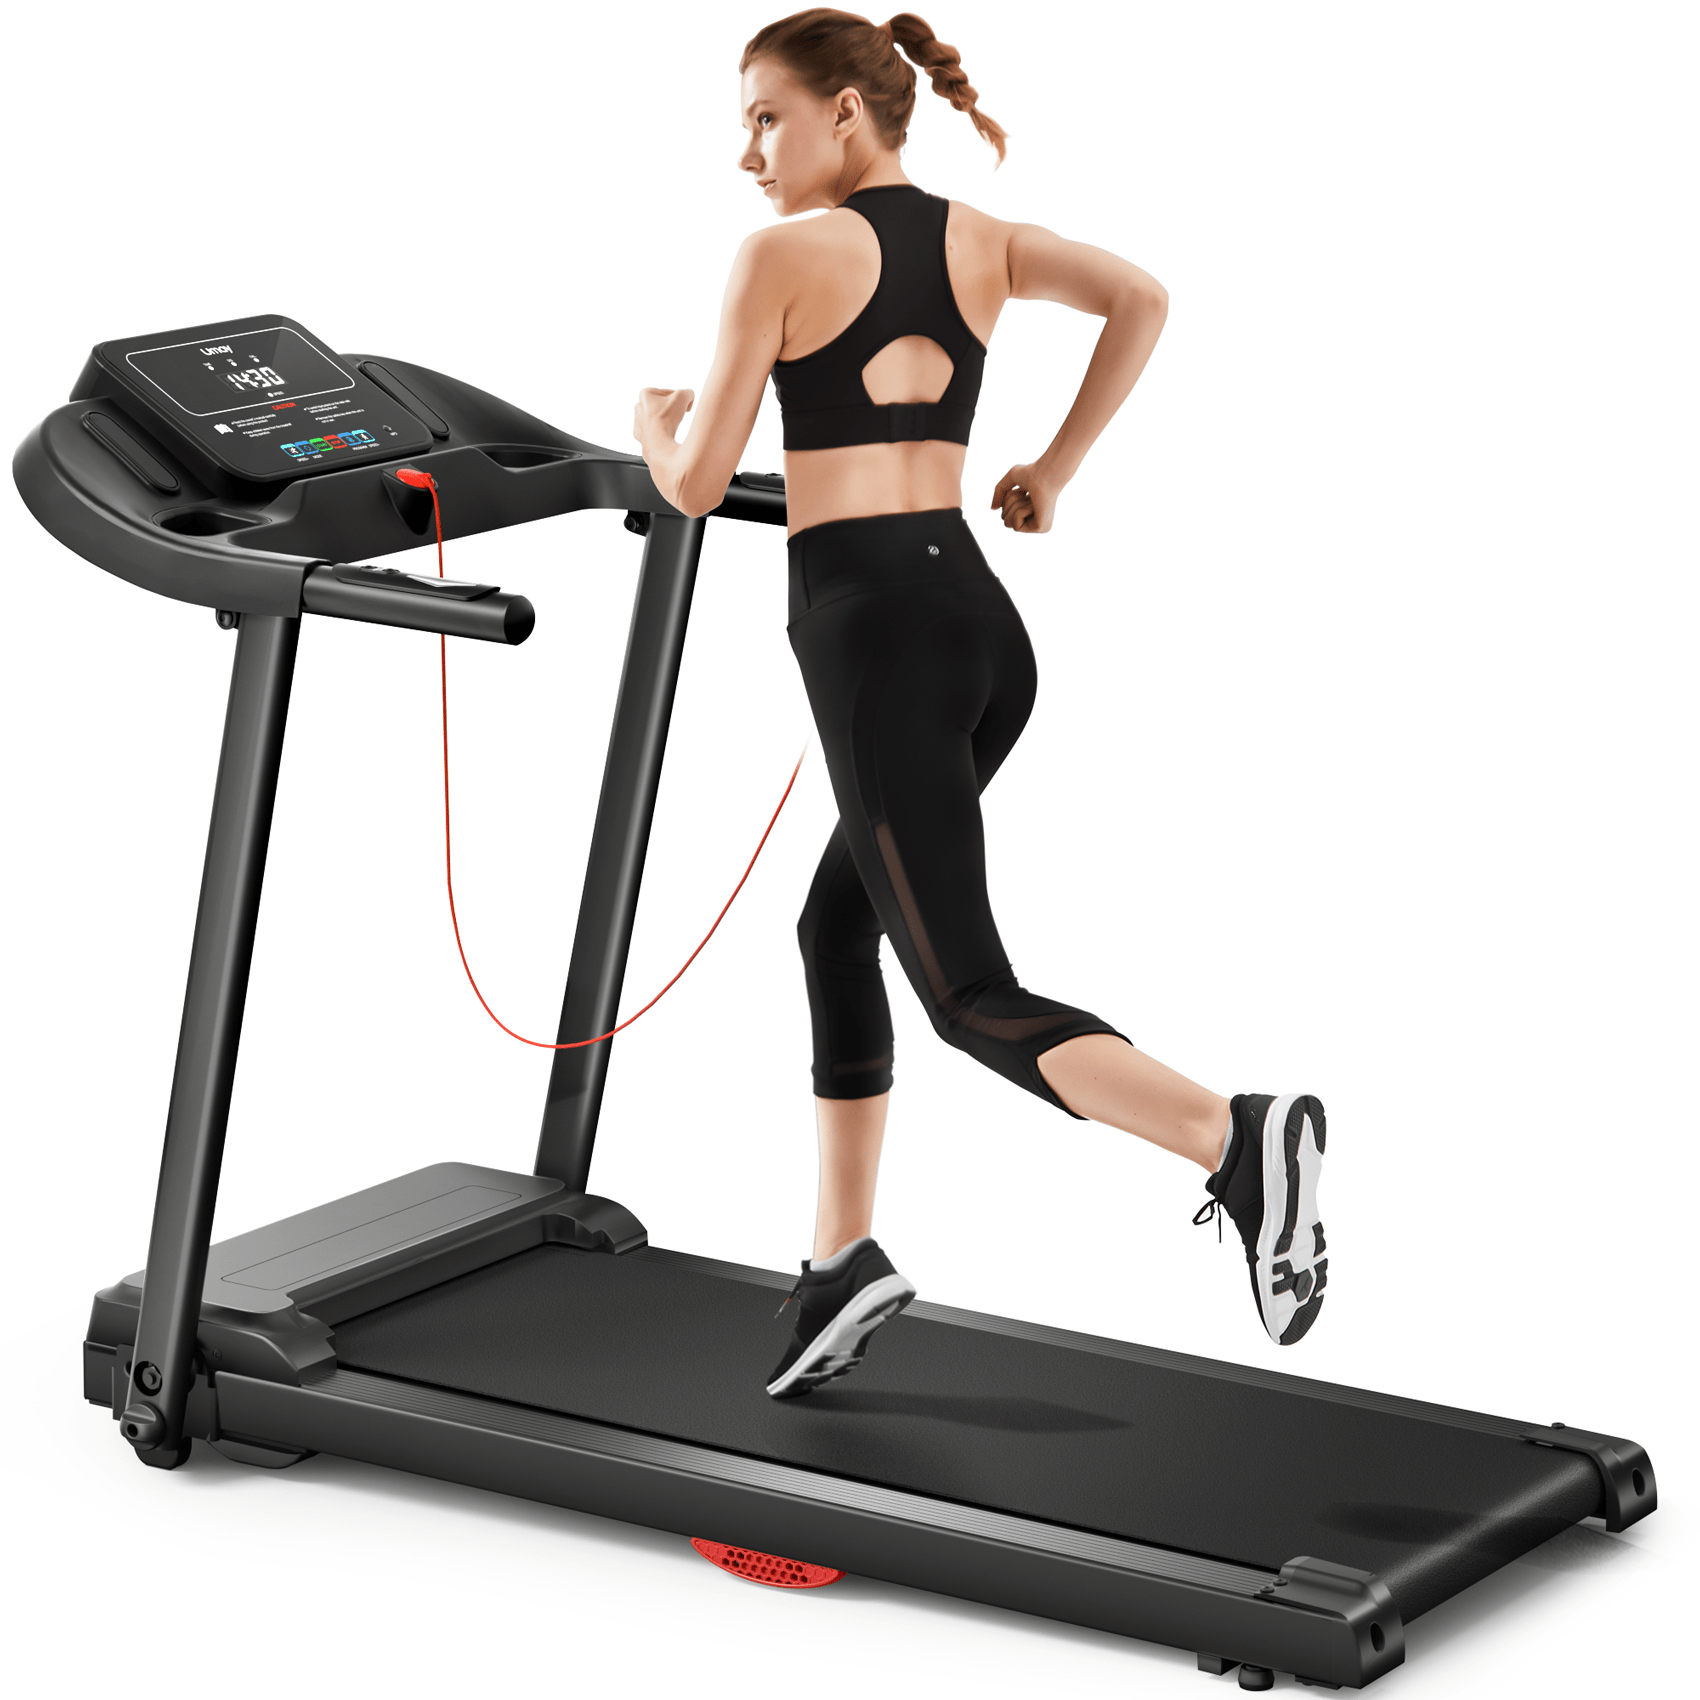 

Foldable Treadmills For Home, Quiet 3.0hp Folding Treadmill With Silicone Shock Absorption, Heart Rate Monitor, 300 Lbs Capacity